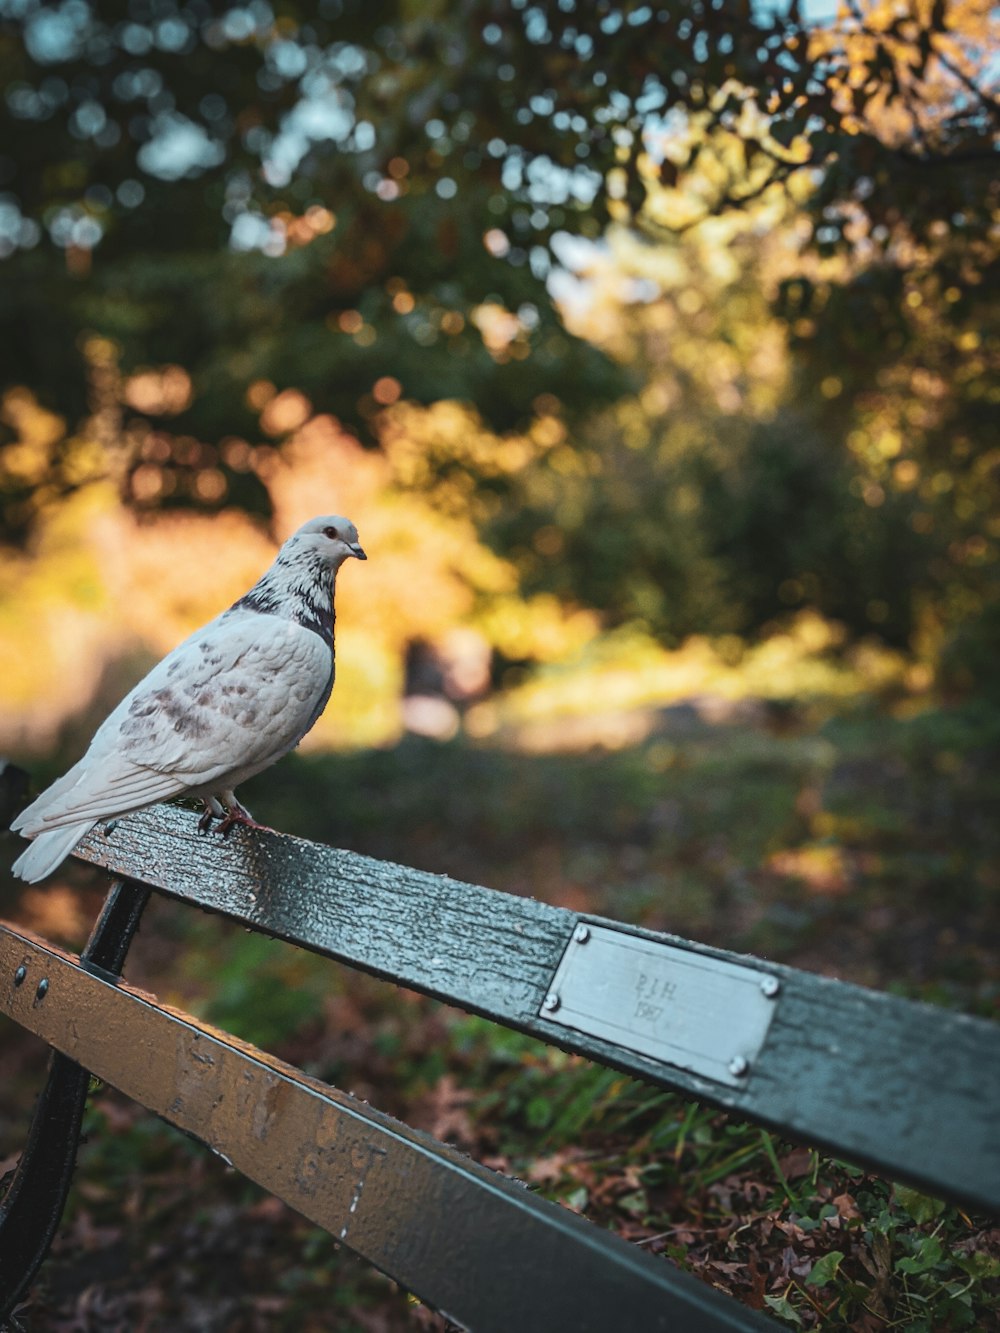 white and gray bird on brown wooden bench during daytime